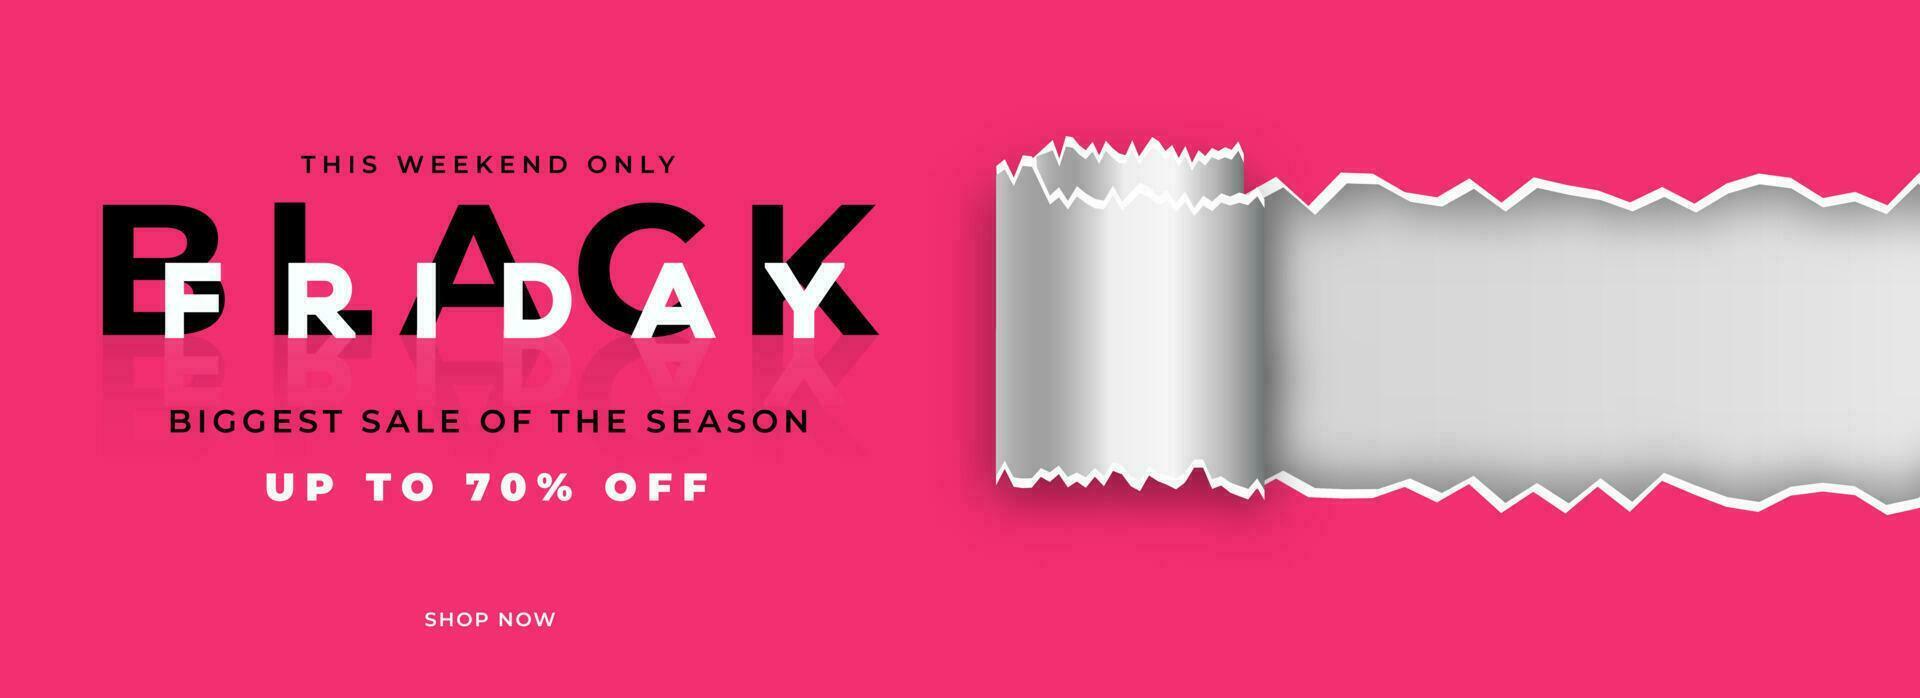 Rolled Torn Paper Pink and Silver Header or Banner Design with Discount Offer for Black Friday Biggest Sale. vector